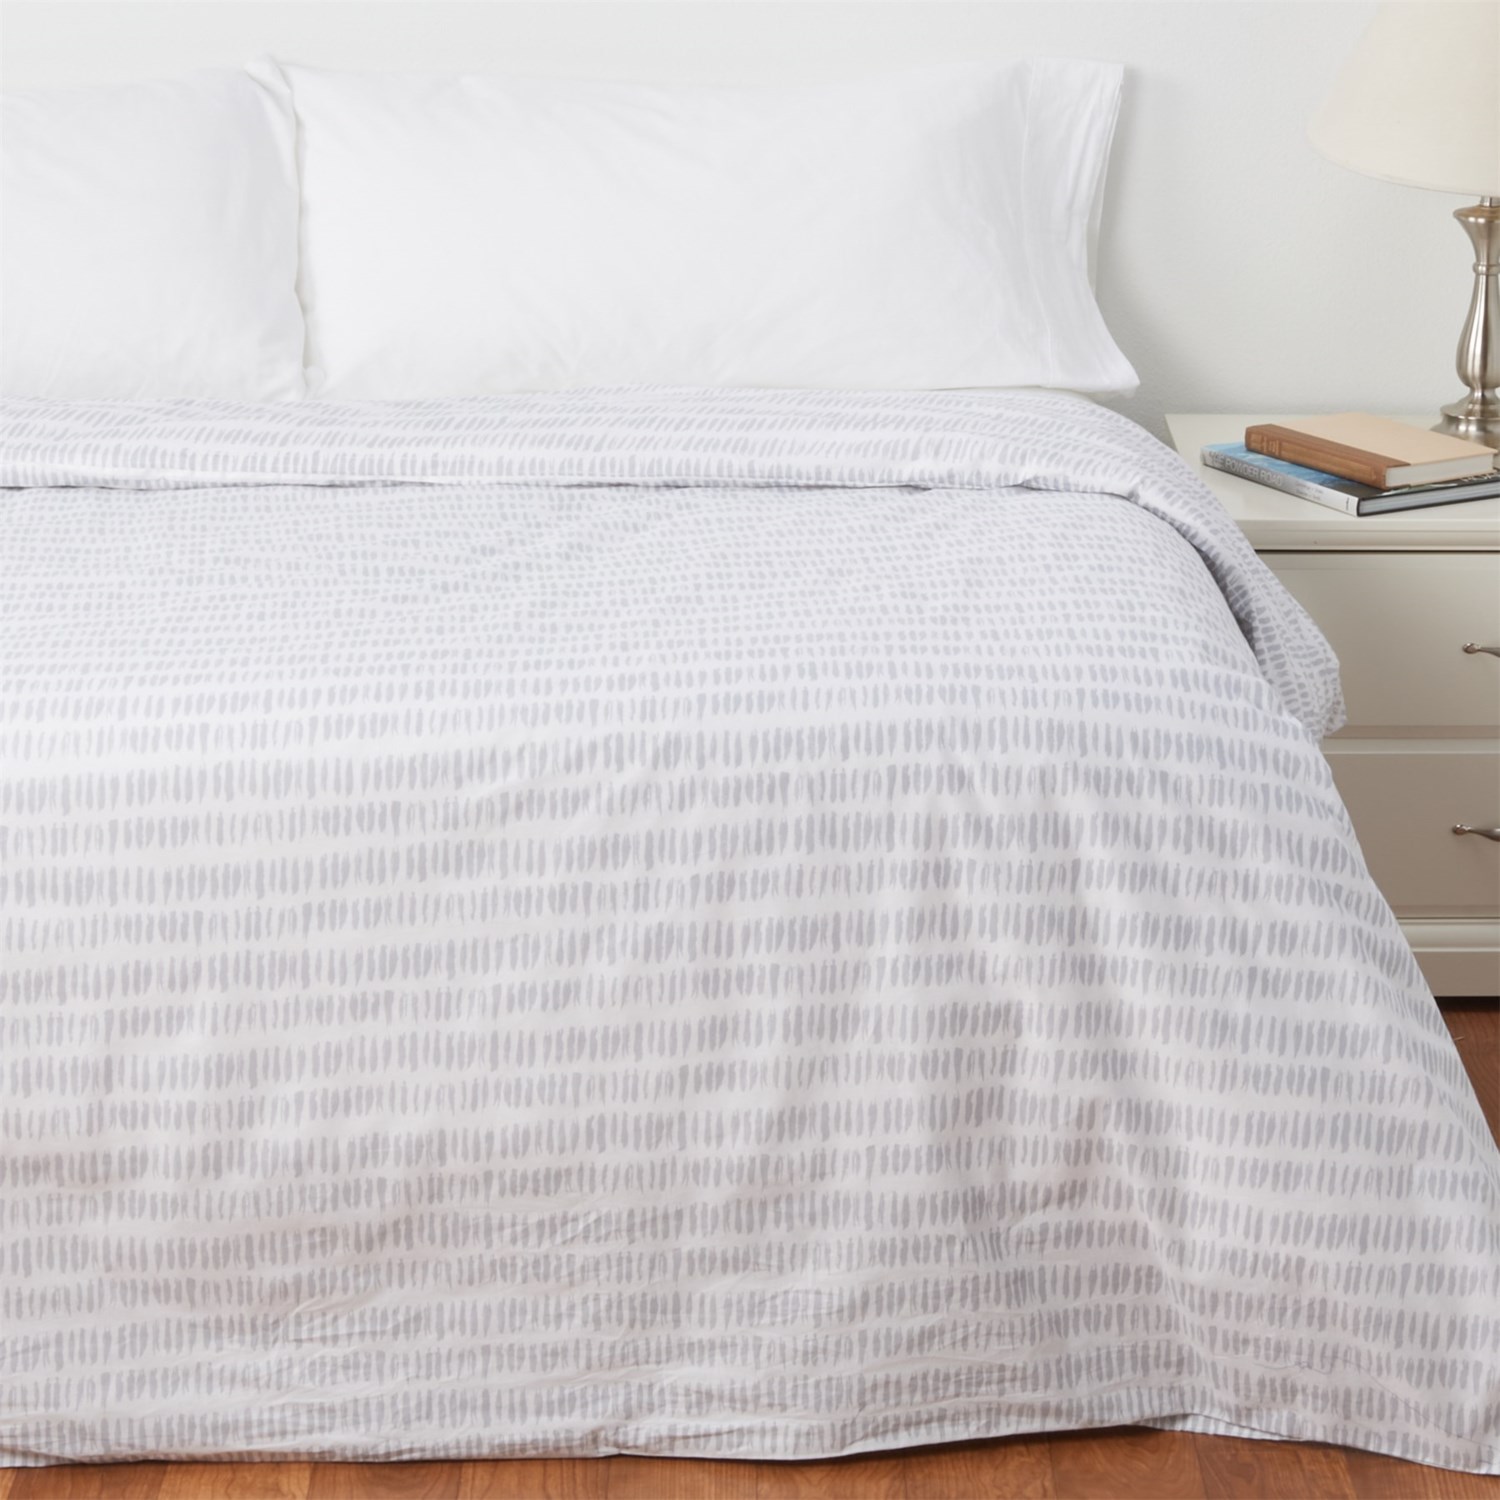 Details about  / Glorious Bedding Collection Ivory Striped 1000TC Organic Cotton All US Size